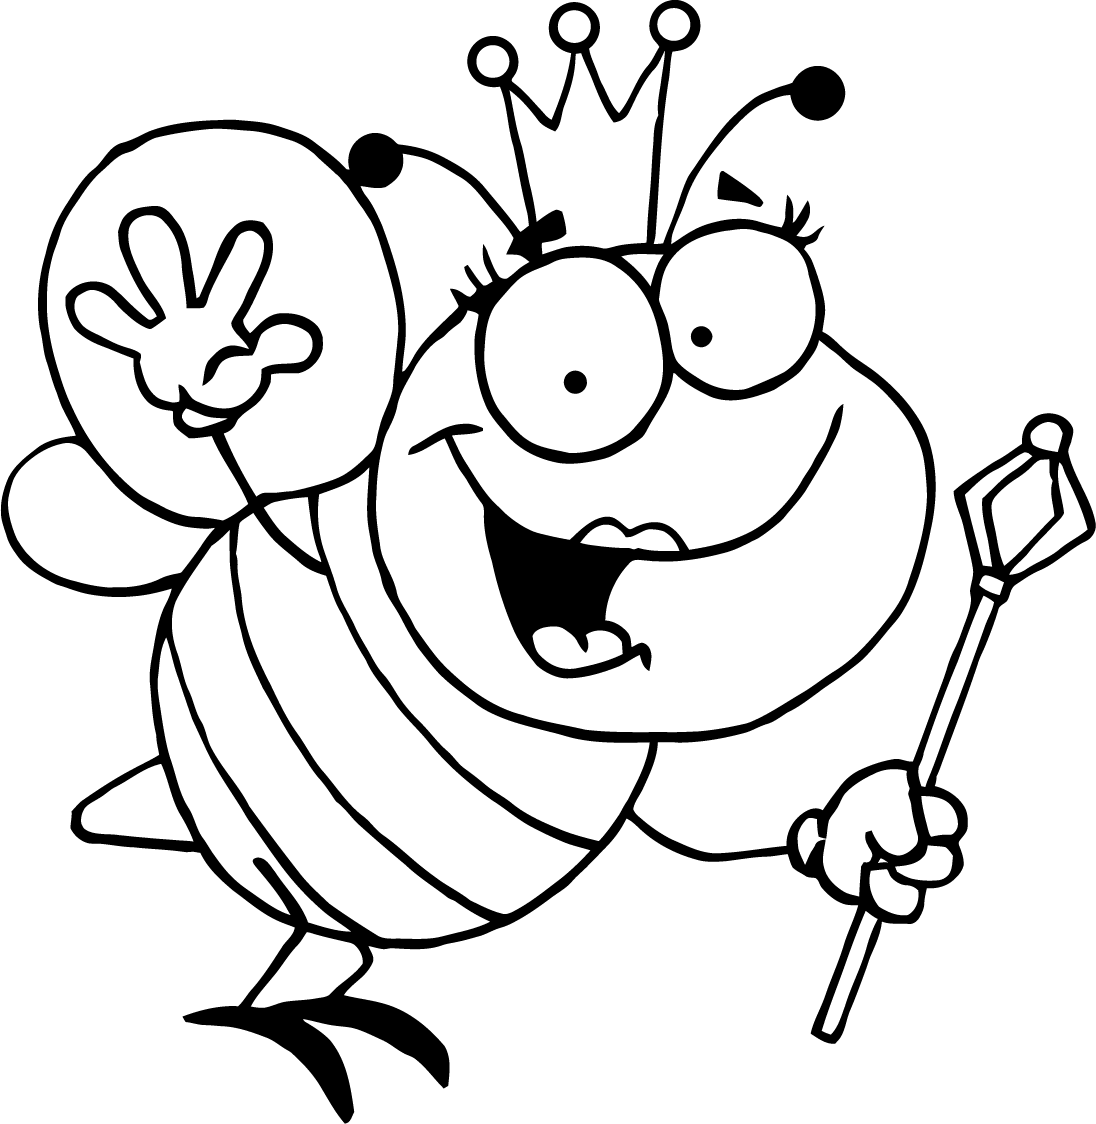 Queen Bee Coloring Pages - ClipArt Best